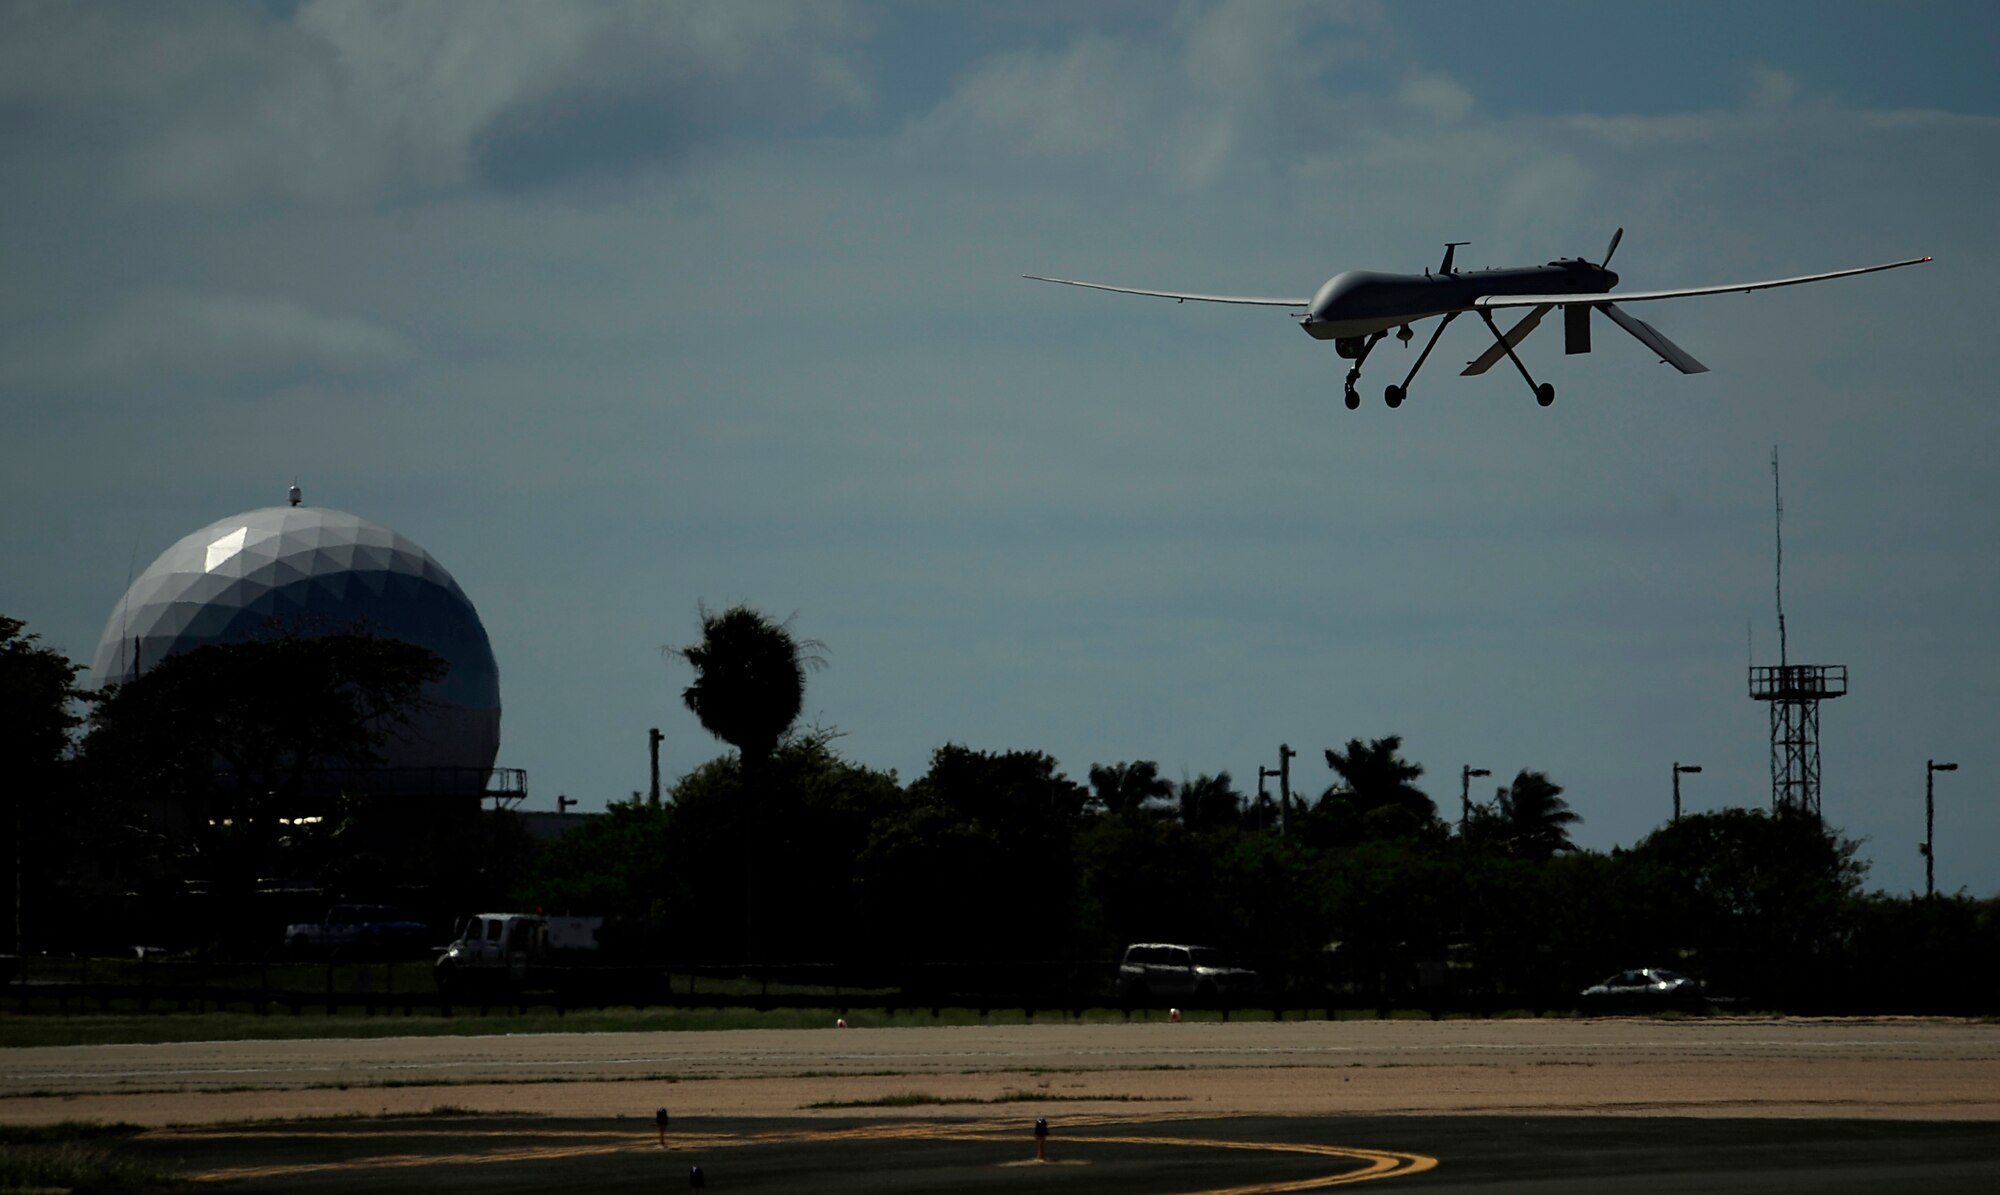 A U.S. Air Force RQ-1 Predator from the 432nd Wing, Creech Air Force Base, Nevada lands at Aeropuerto Rafael Hernandez outside Aguadilla, Puerto Rico on 28 Jan., 2010.  The RQ-1 remotely piloted systems are operating out of Puerto Rico in support of Operation Unified Response in Haiti.  Airmen from Creech Air Force Base, Las Vegas, Nev. are providing 24 hour a day full-motion video in real time to international relief workers on the ground in order to speed humanitarian aid to remote and cut-off areas of the country following the earthquake on 12 Jan., 2010. (U.S. Air Force photo by Tech. Sgt. Jaime Mendez)